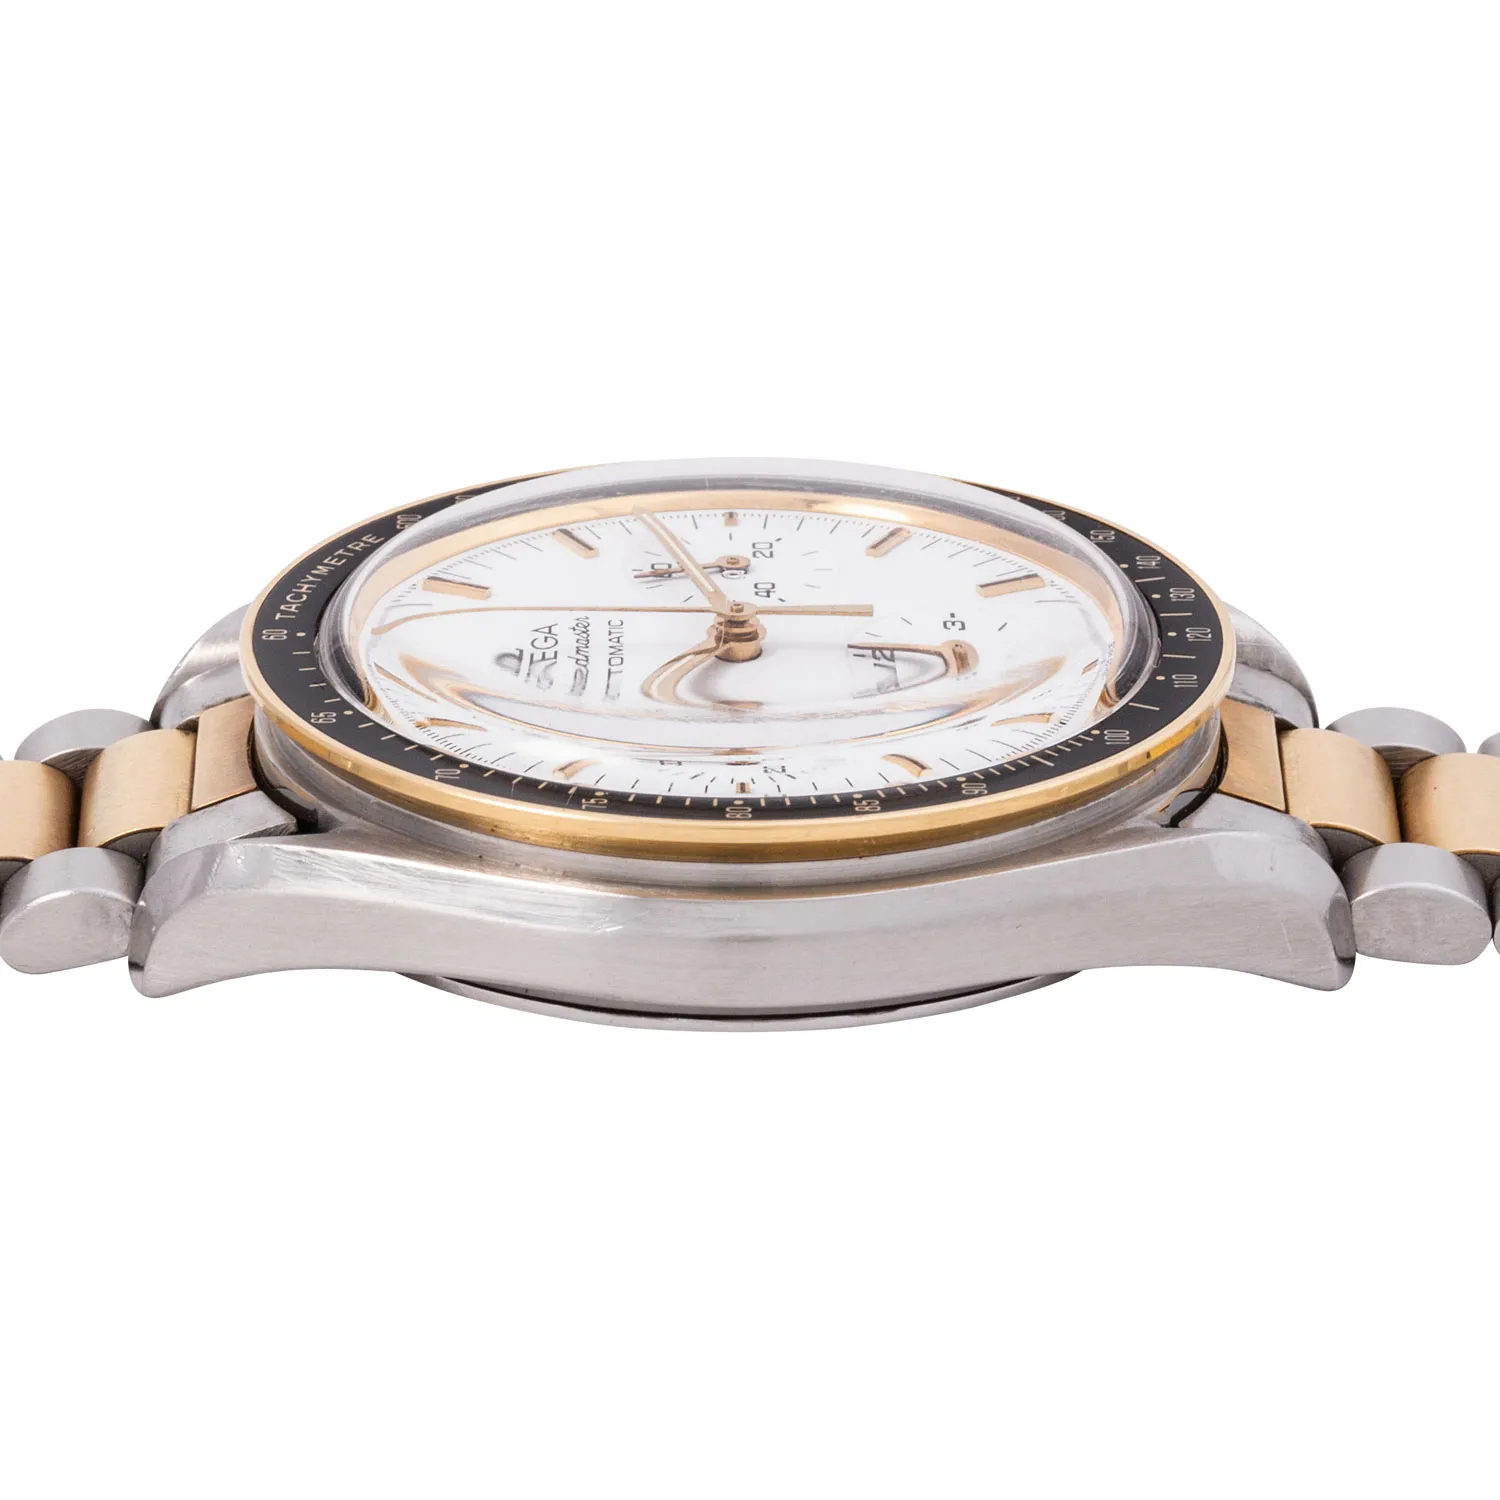 Omega Speedmaster Reduced 175.0032 39mm Yellow gold and stainless steel White 3